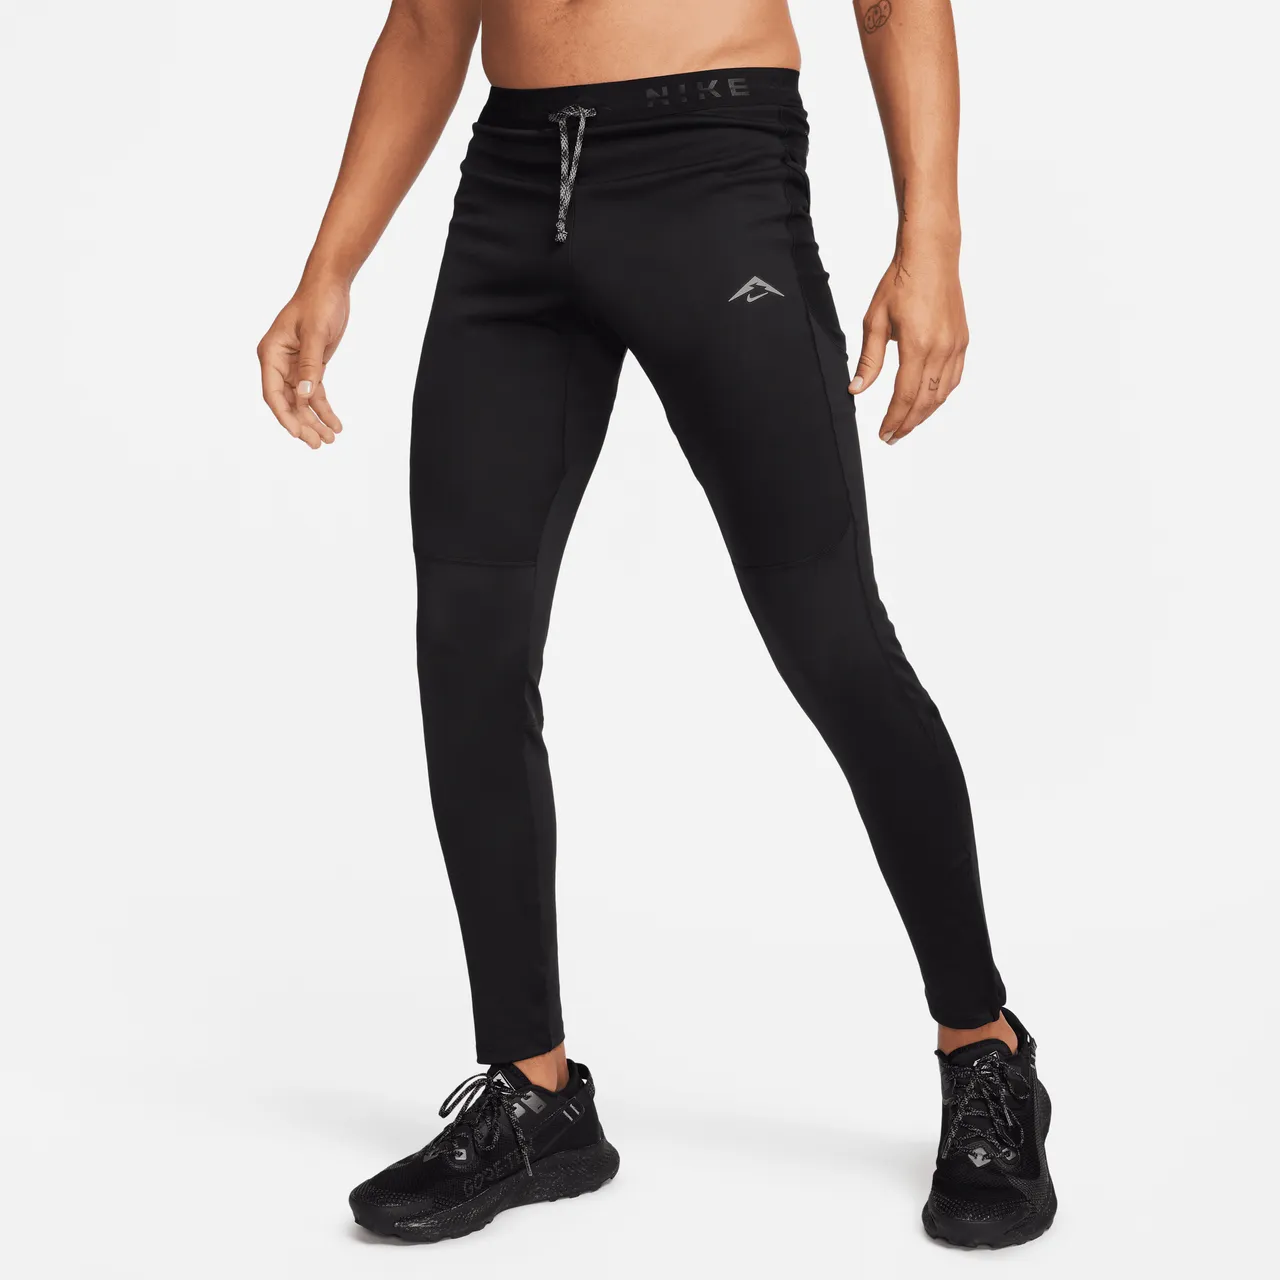 Nike Lunar Ray Men's Winterized Running Tights - Black - Polyester